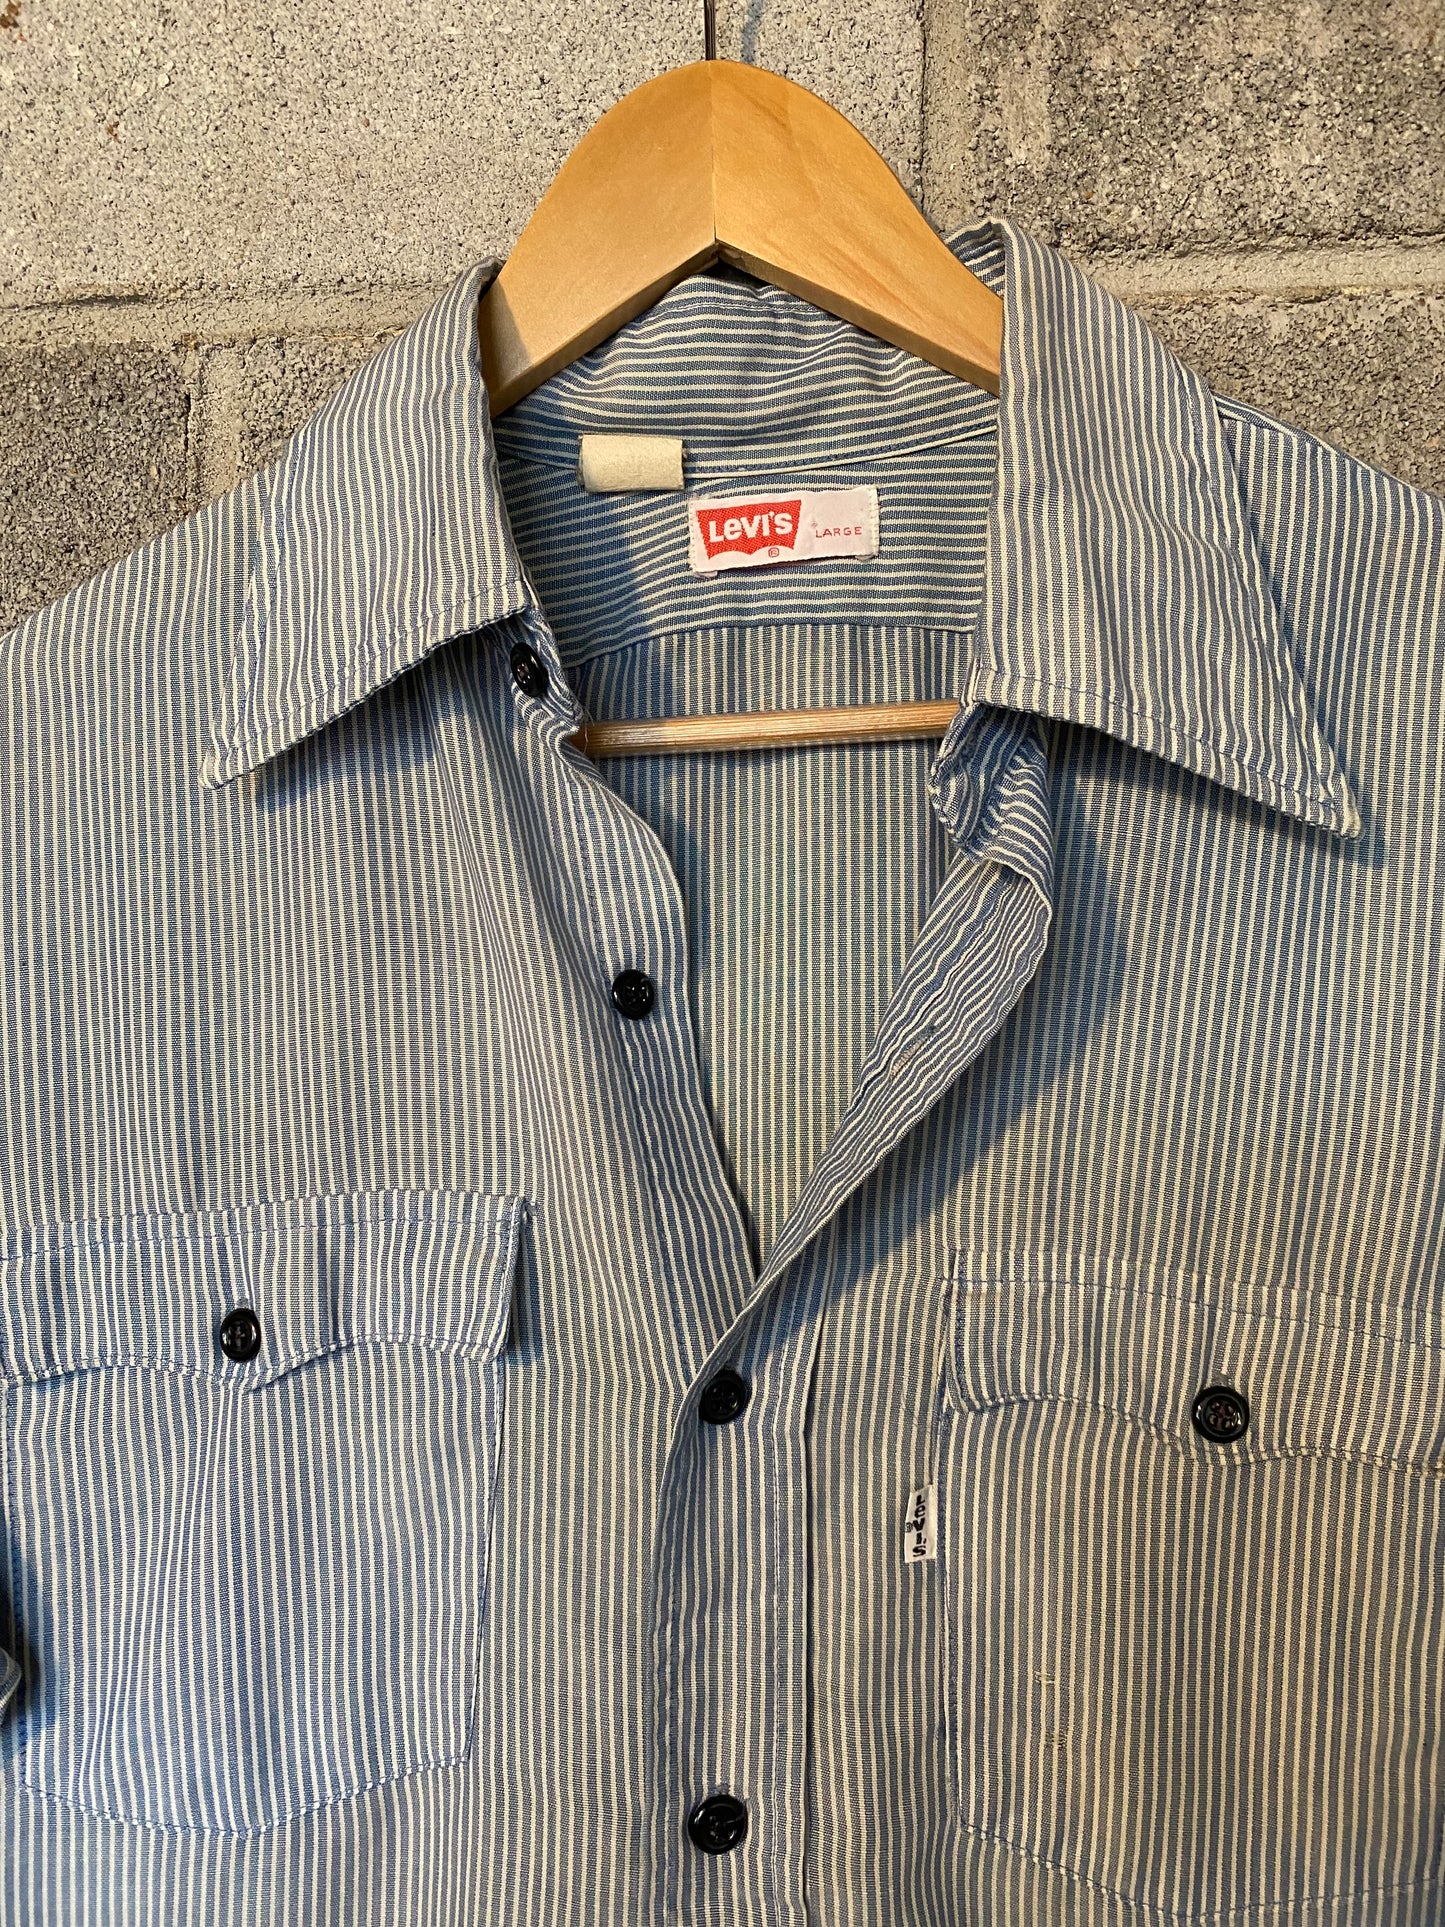 1980S Hickory Striped Levis Button Down | L